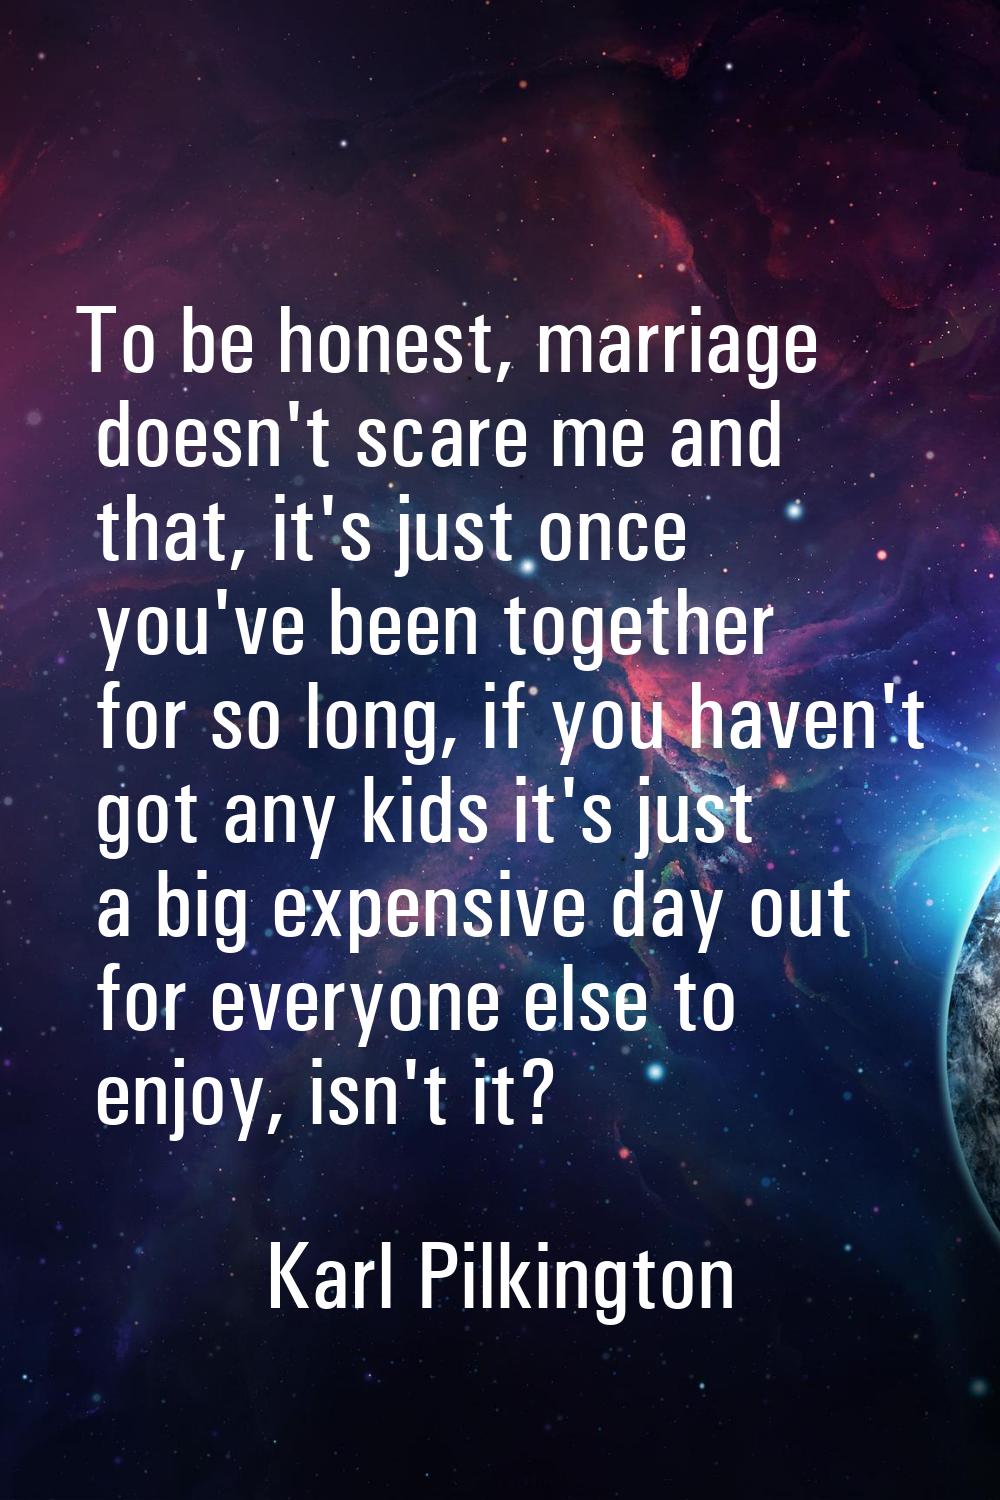 To be honest, marriage doesn't scare me and that, it's just once you've been together for so long, 